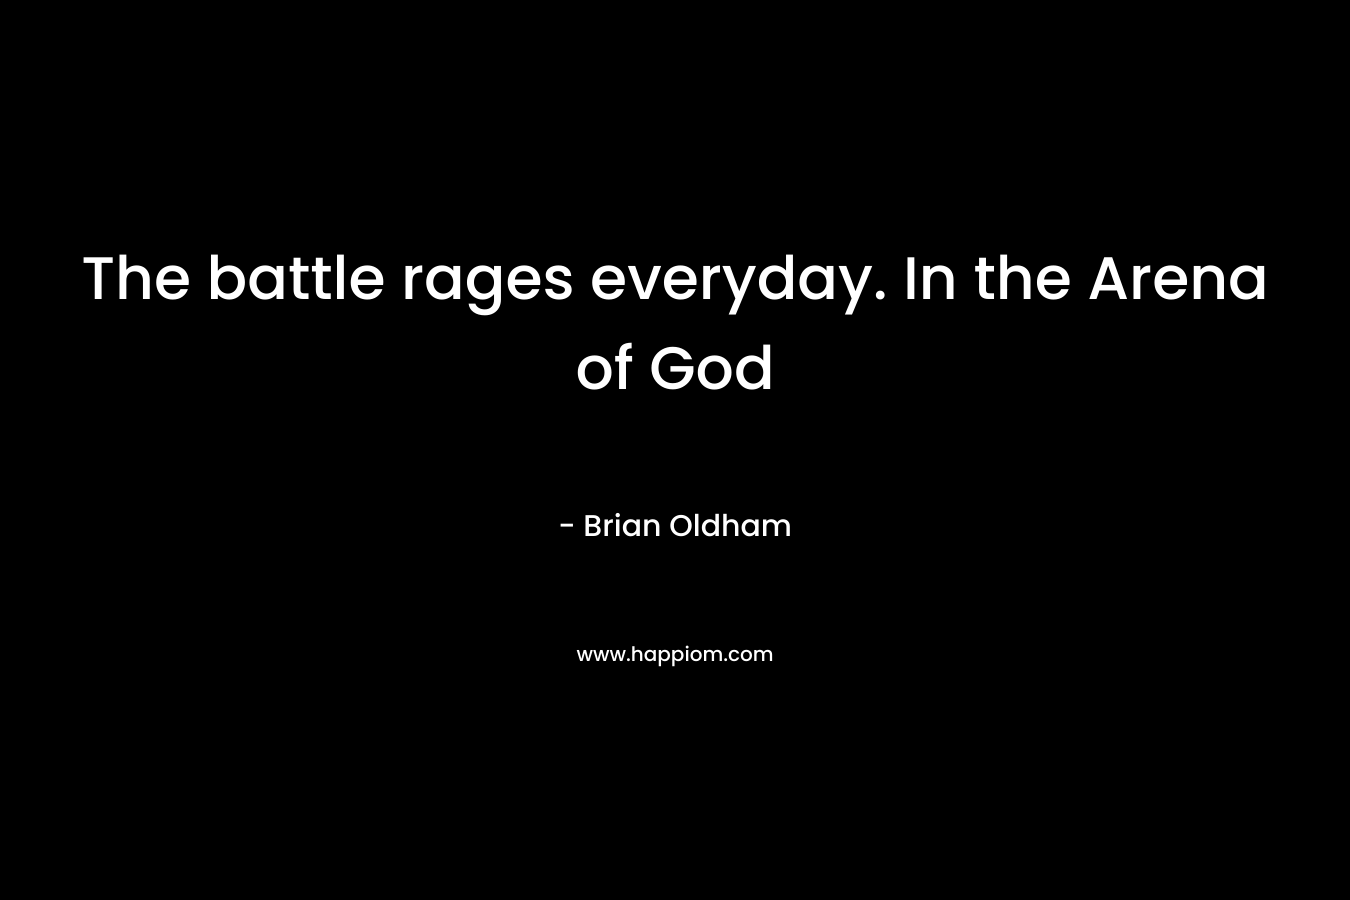 The battle rages everyday. In the Arena of God